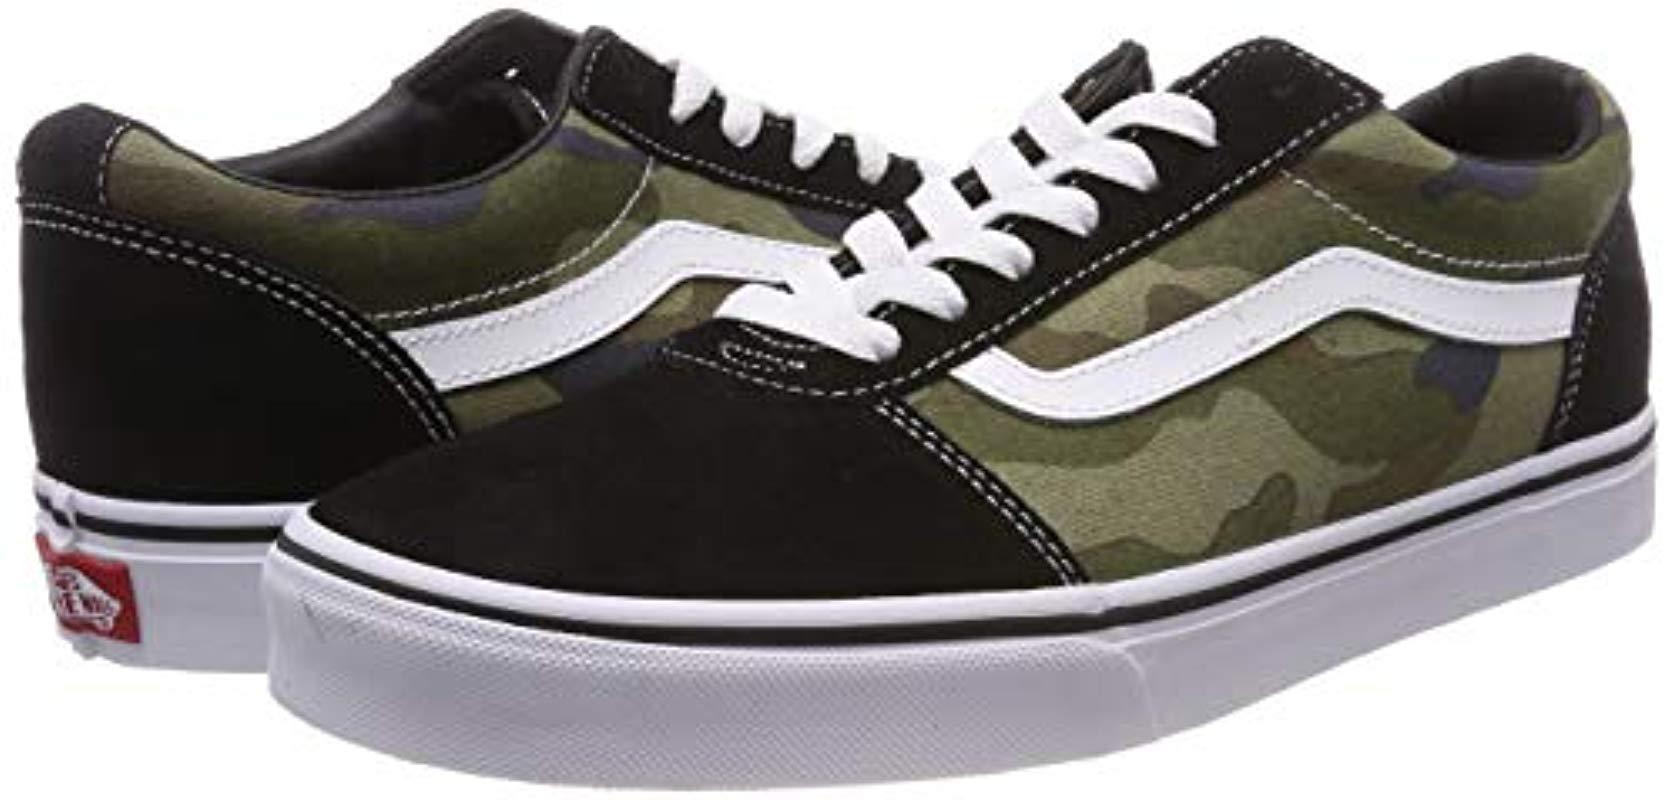 Maddie Suede/Canvas, Sneakers Basses Homme, Multicolore ((Camo ...